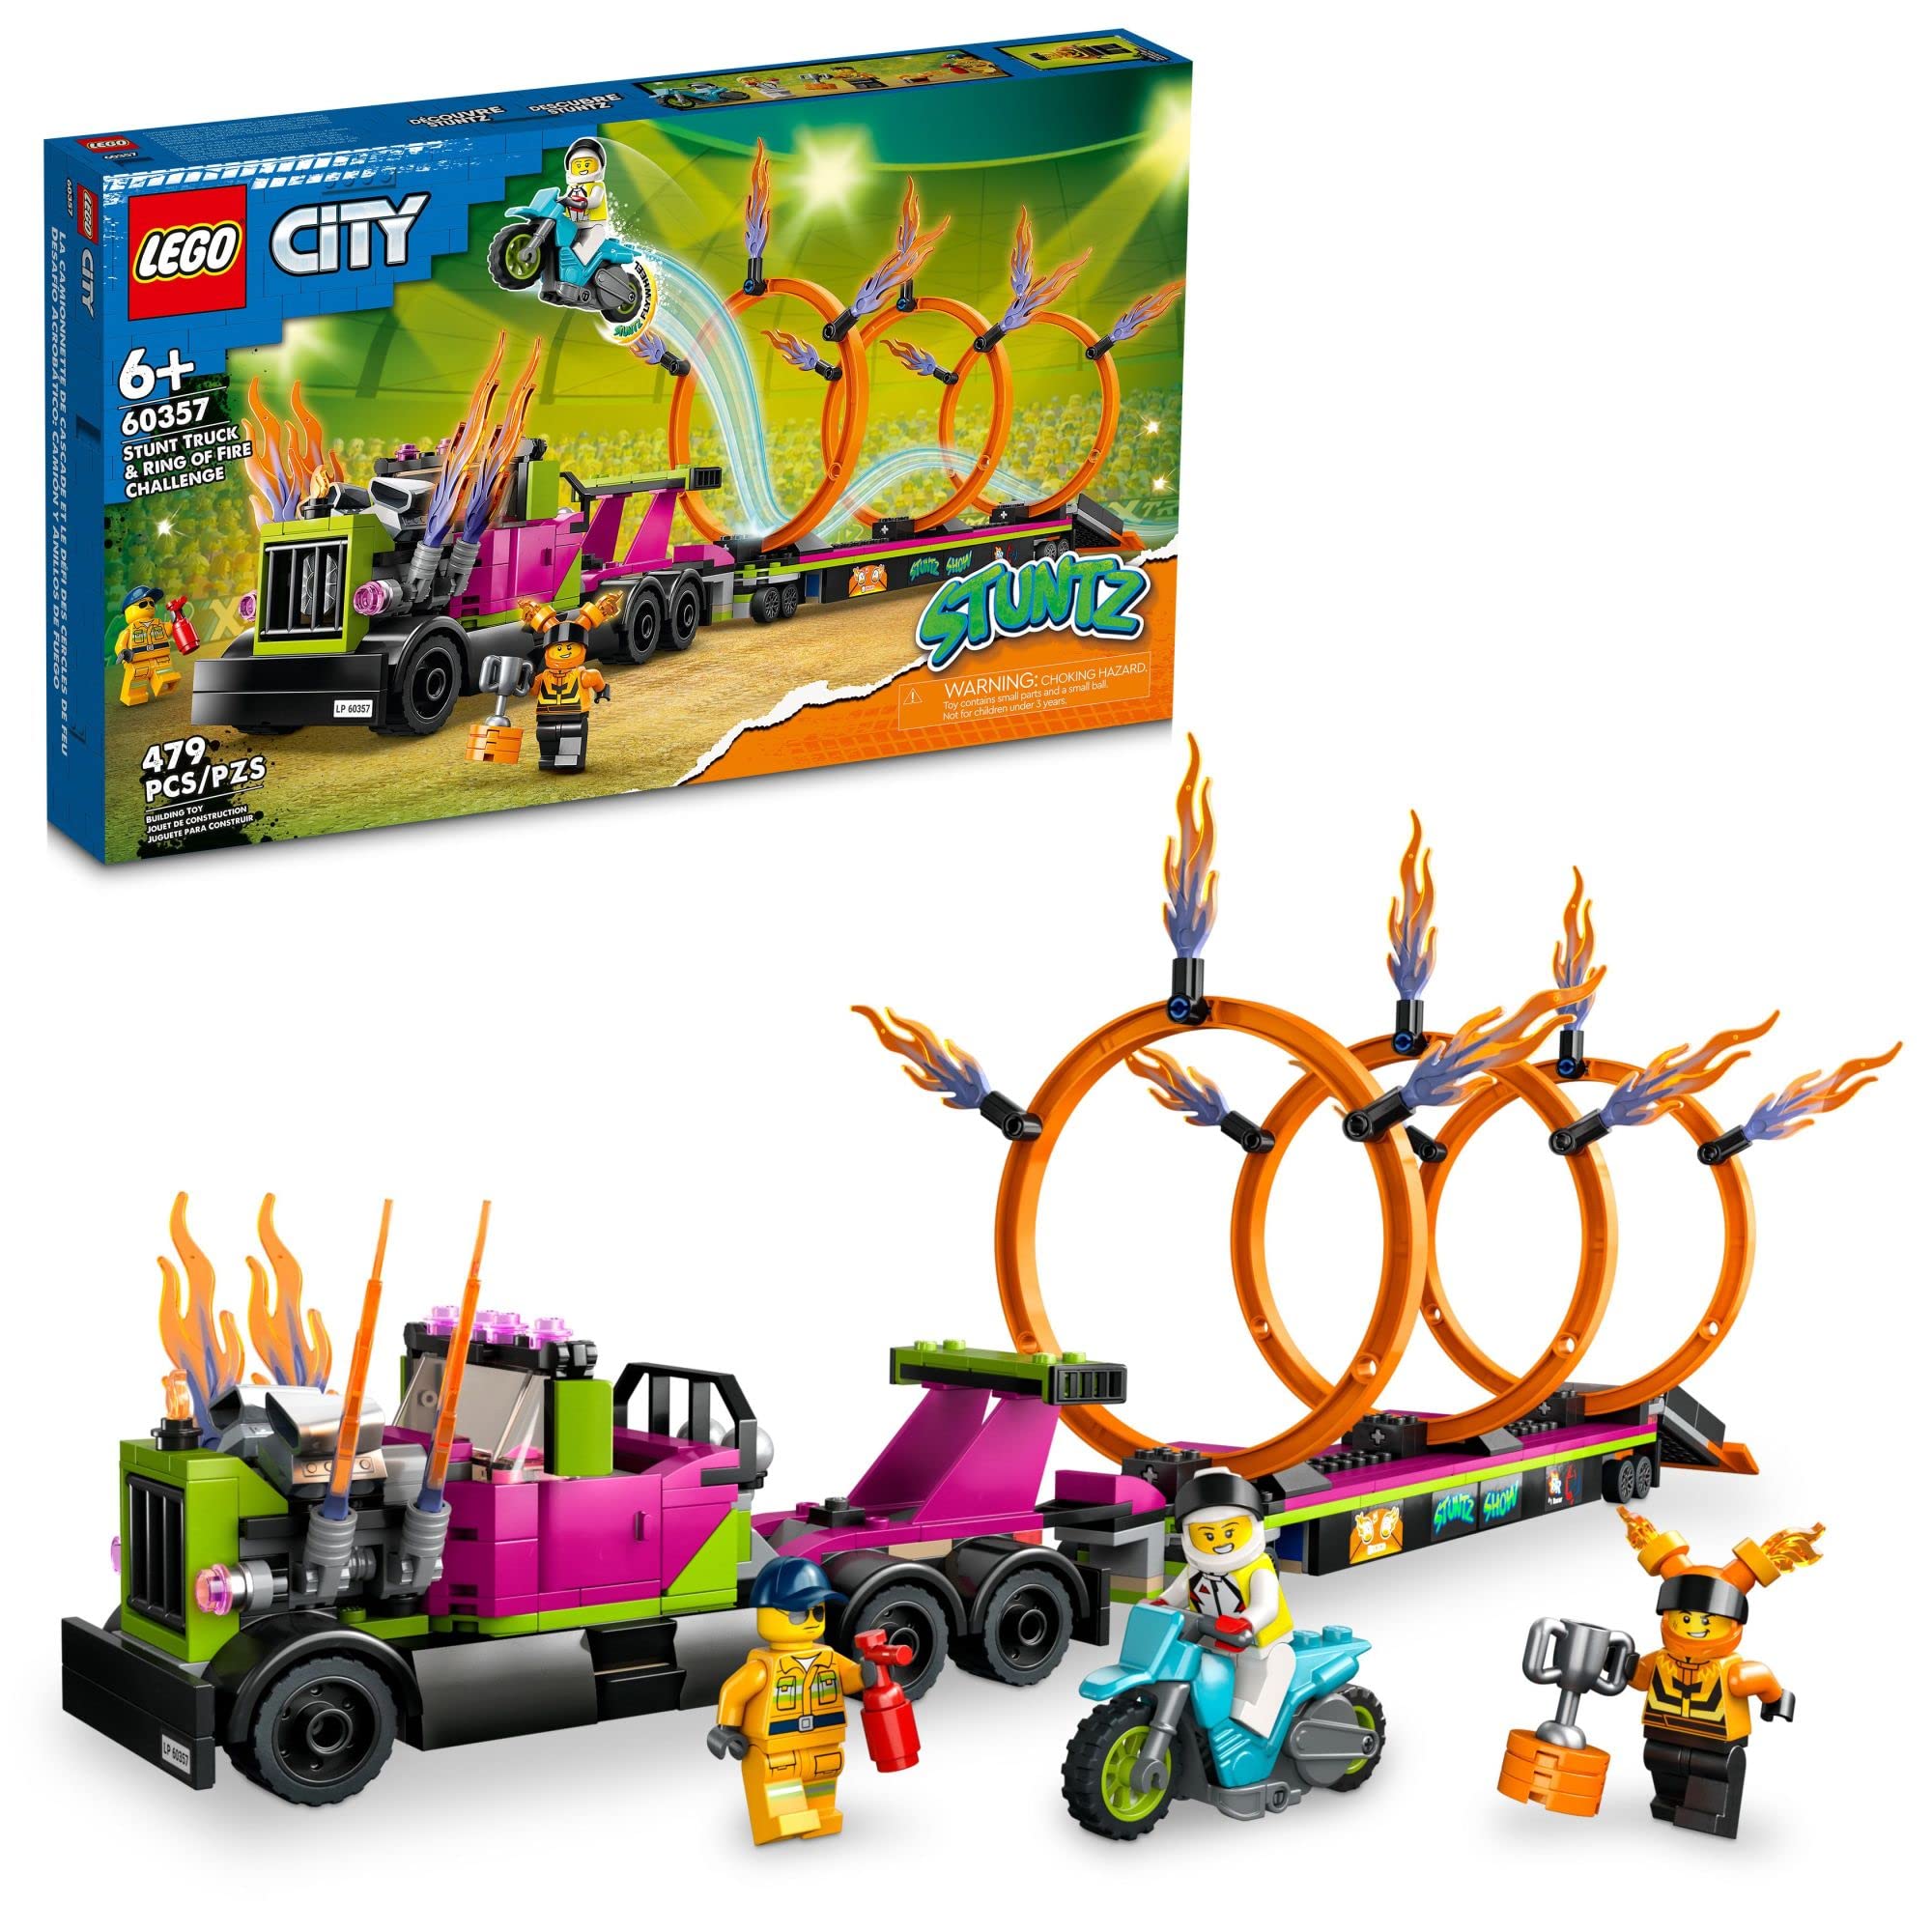 479-Piece LEGO City Stuntz Stunt Truck & Ring of Fire Challenge w/ Flywheel-Powered Motorcycle Toy & Minifigures $30.55 + Free Shipping w/ Prime or on $35+